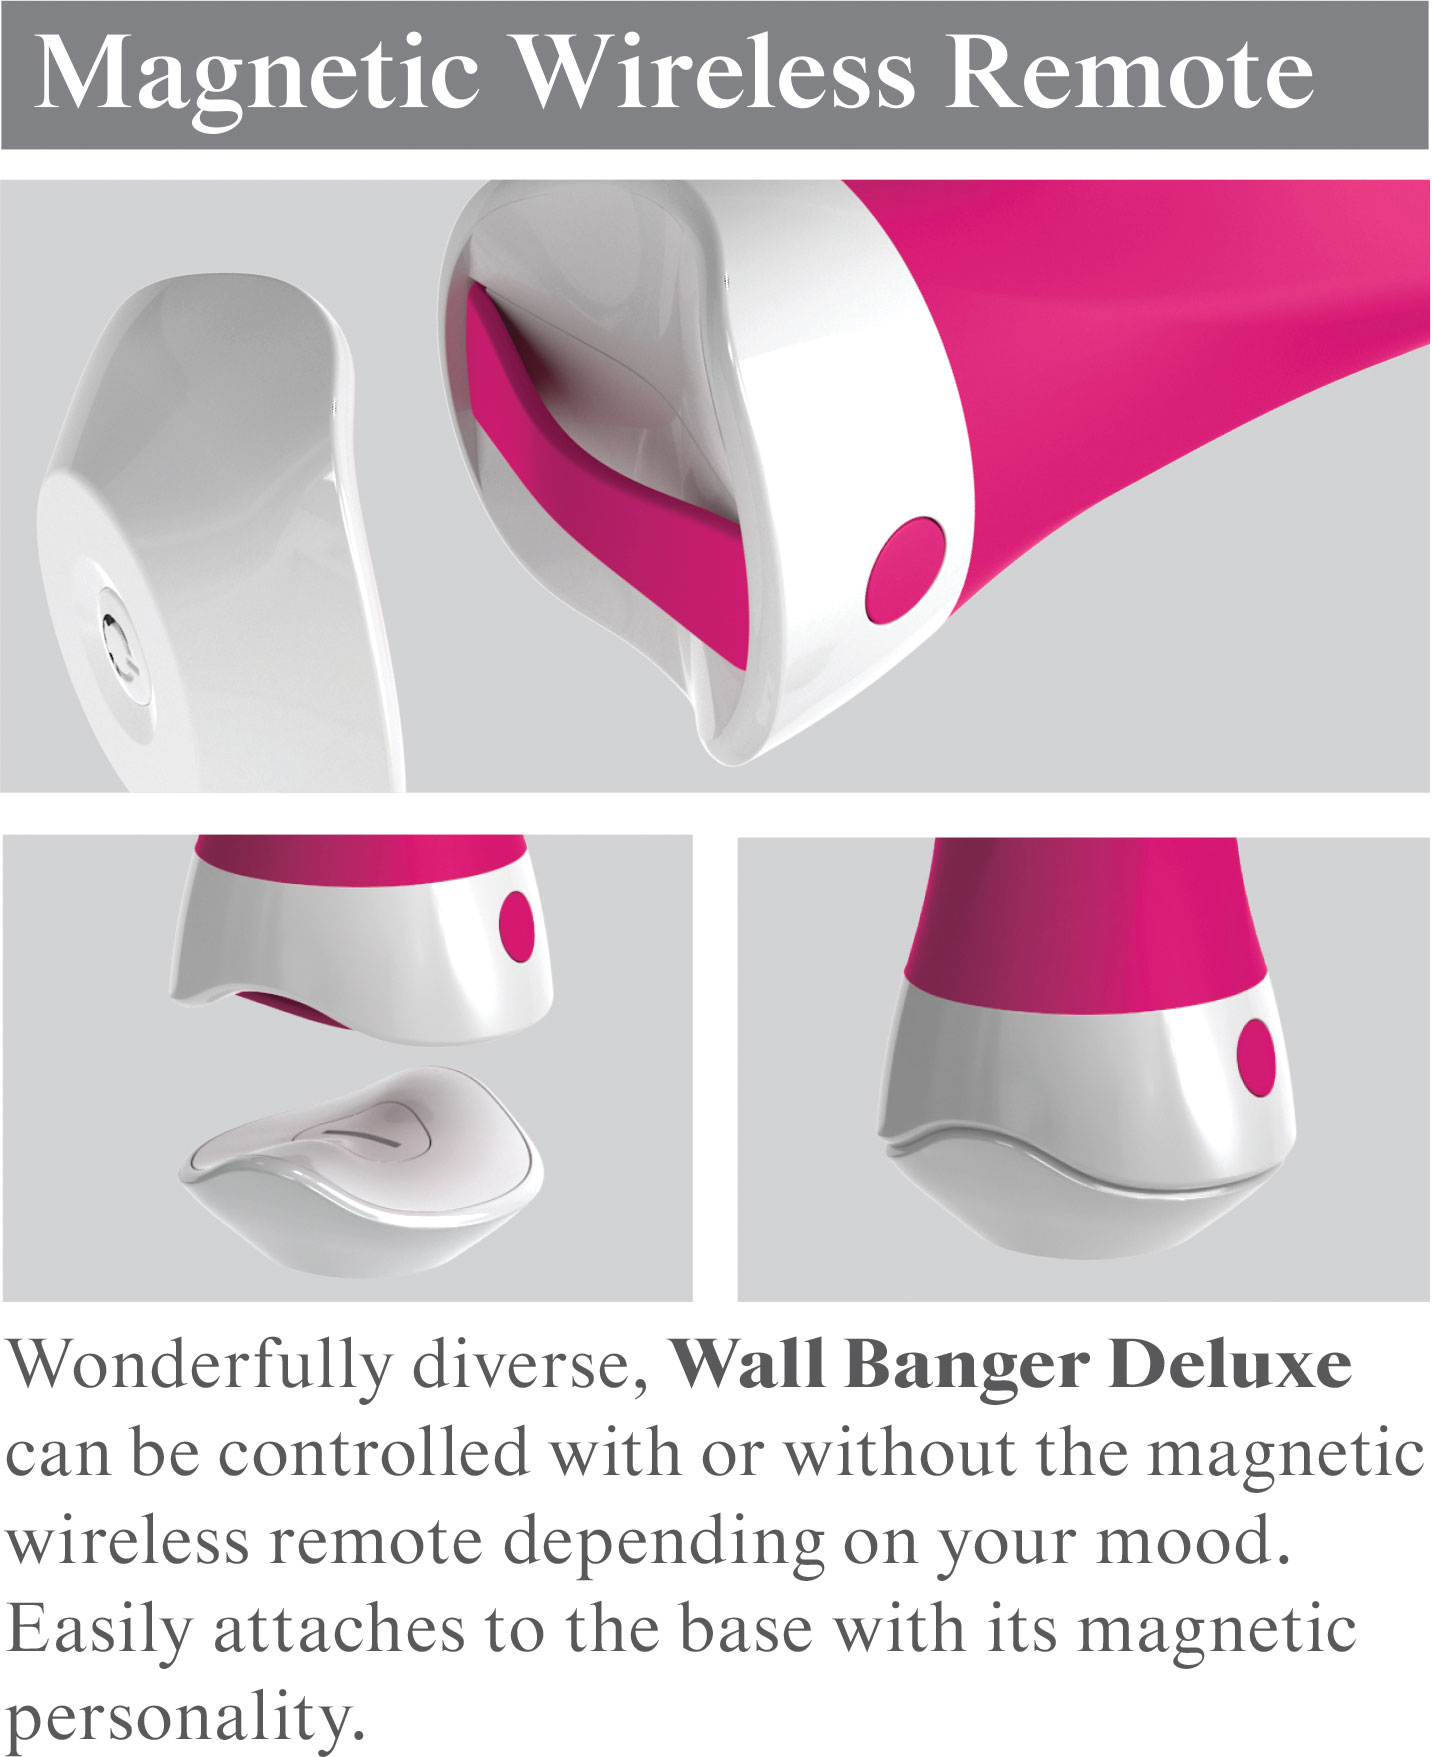 3Some Wall Banger Deluxe Rechargeable Remote Controlled Silicone Vibrator - Magnetic Wireless Remote